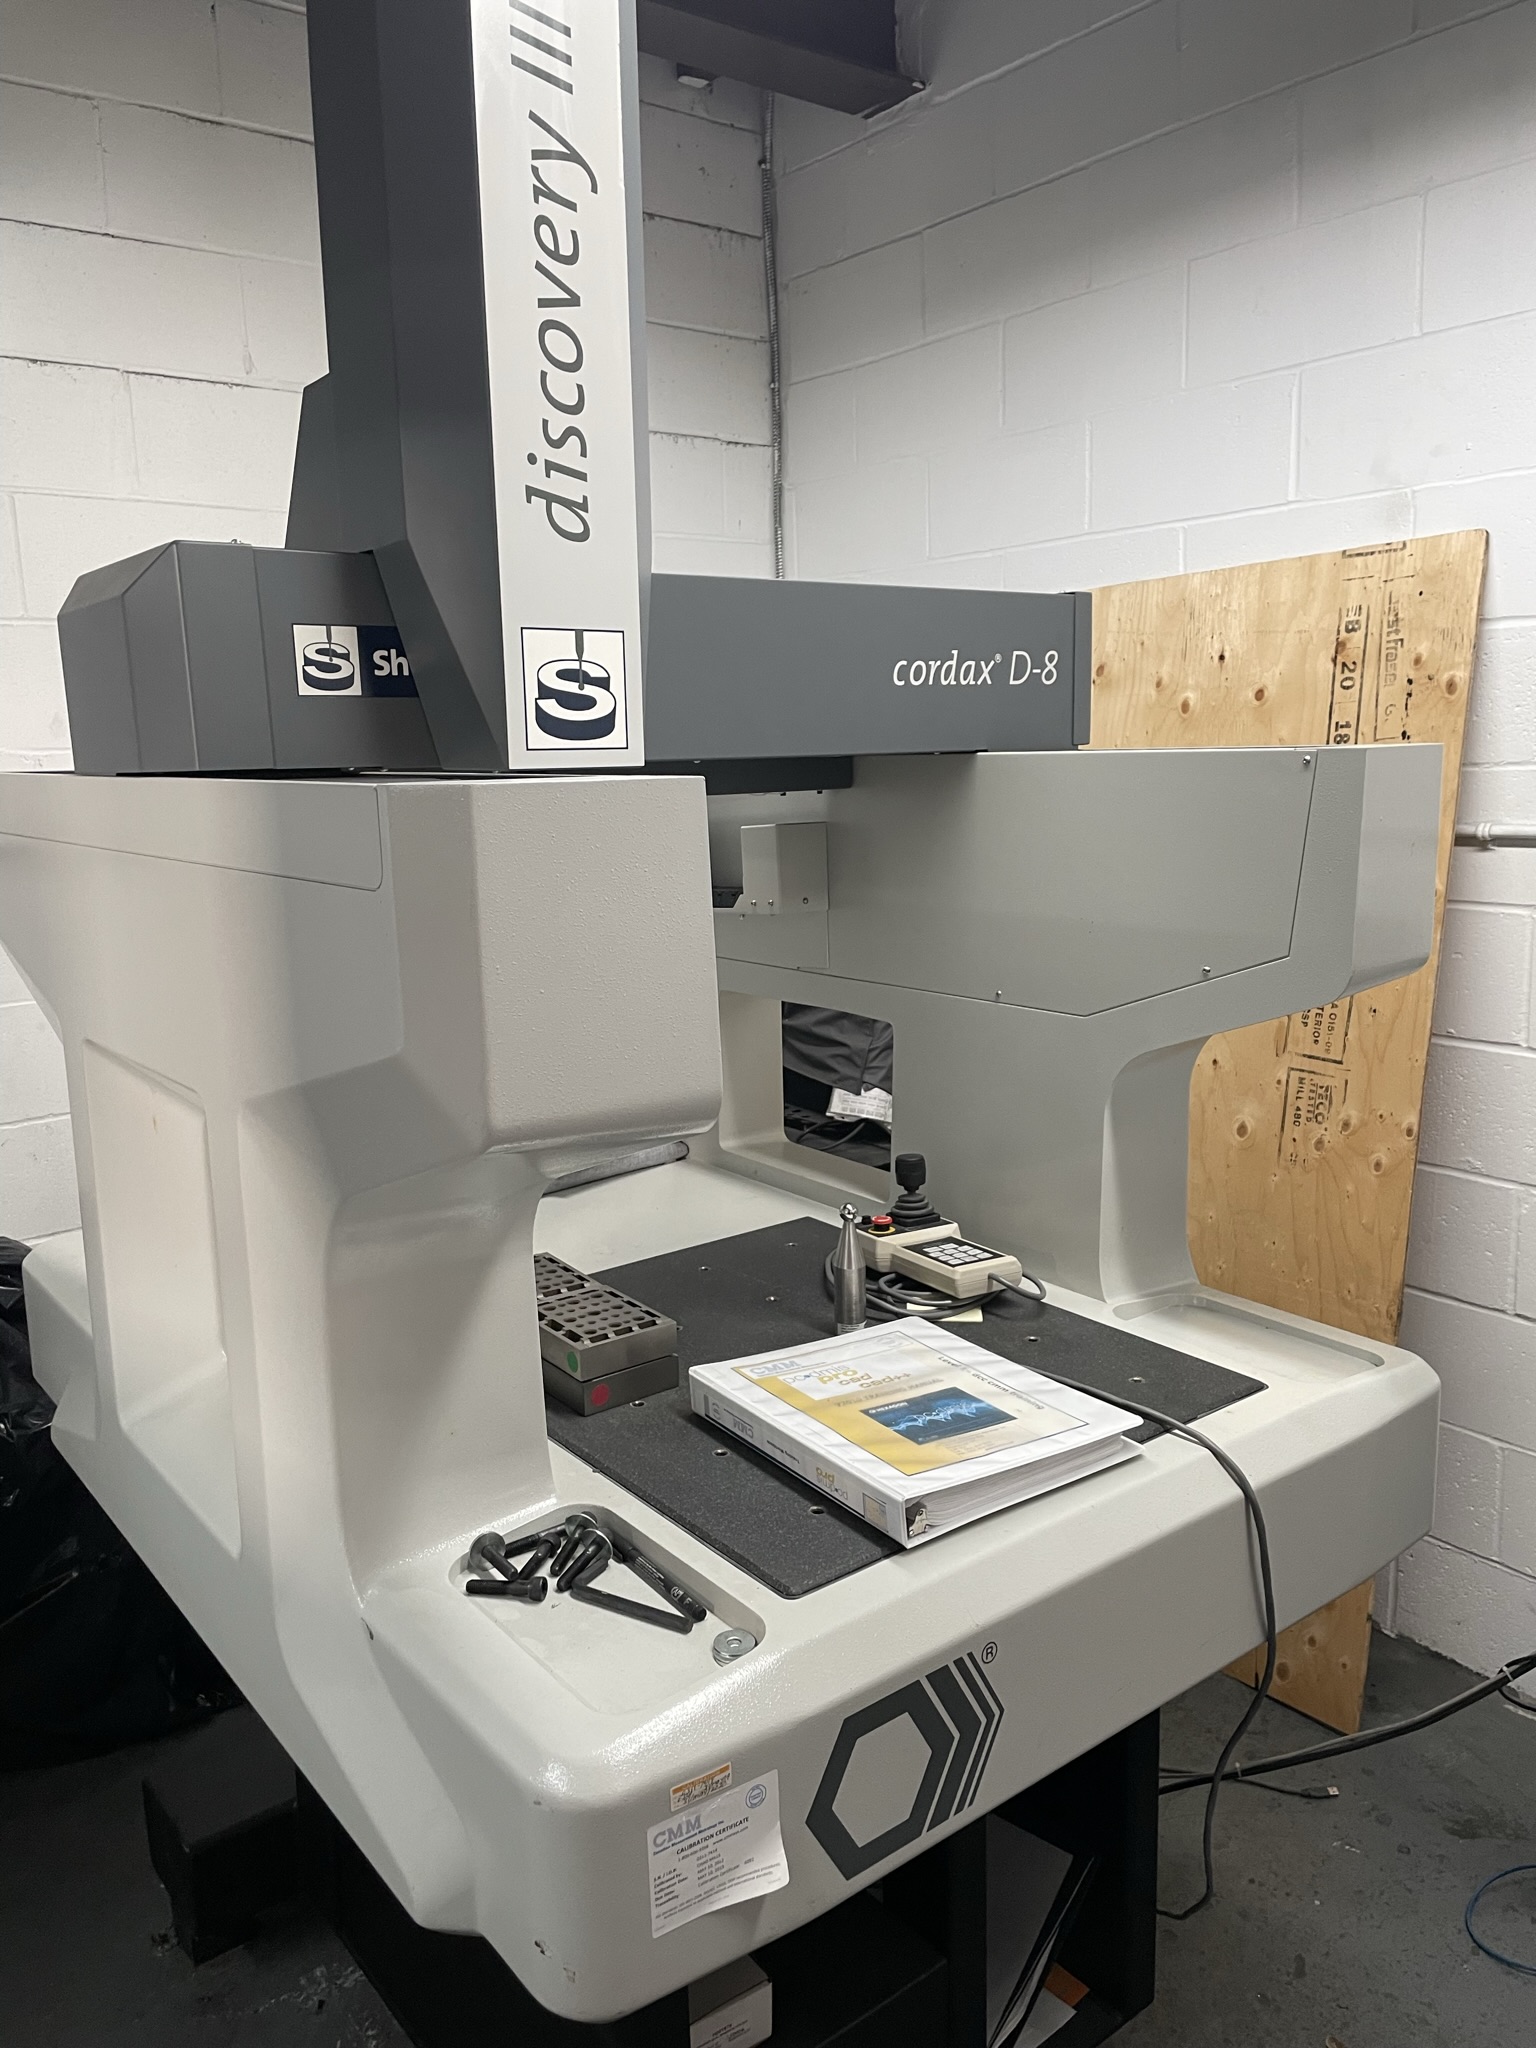 Used Coordinate Measuring Machine Sheffield Cordax Discovery III D-8 2011